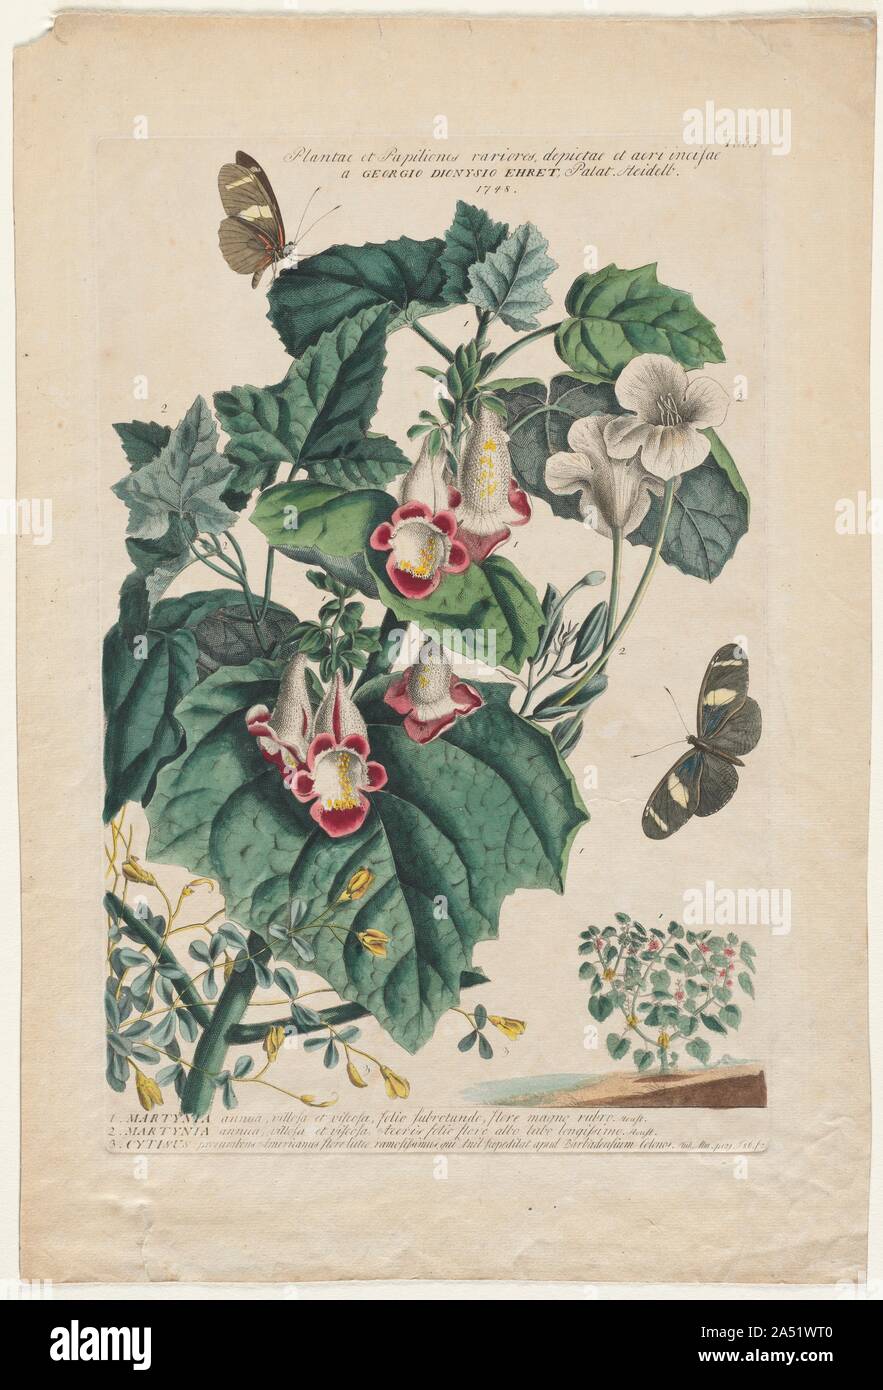 Plantae et Papiliones rariores: Martynia, 1748. Georg Ehret met Carolus Linnaeus in 1736. The dominant botanical artist in the mid-18th century, Ehret settled in England where the nobility clamored to receive his instruction. He commented in his autobiography, &quot;If I could have divided myself into twenty parts I could still have had my hands full.&quot; Ehret struck a fine compromise between the artist and the scientist. &quot;While he did not slavishly imitate what he saw, neither did he allow his feeling for the colour and design of flowers distract him from the fundamentals of plant str Stock Photo